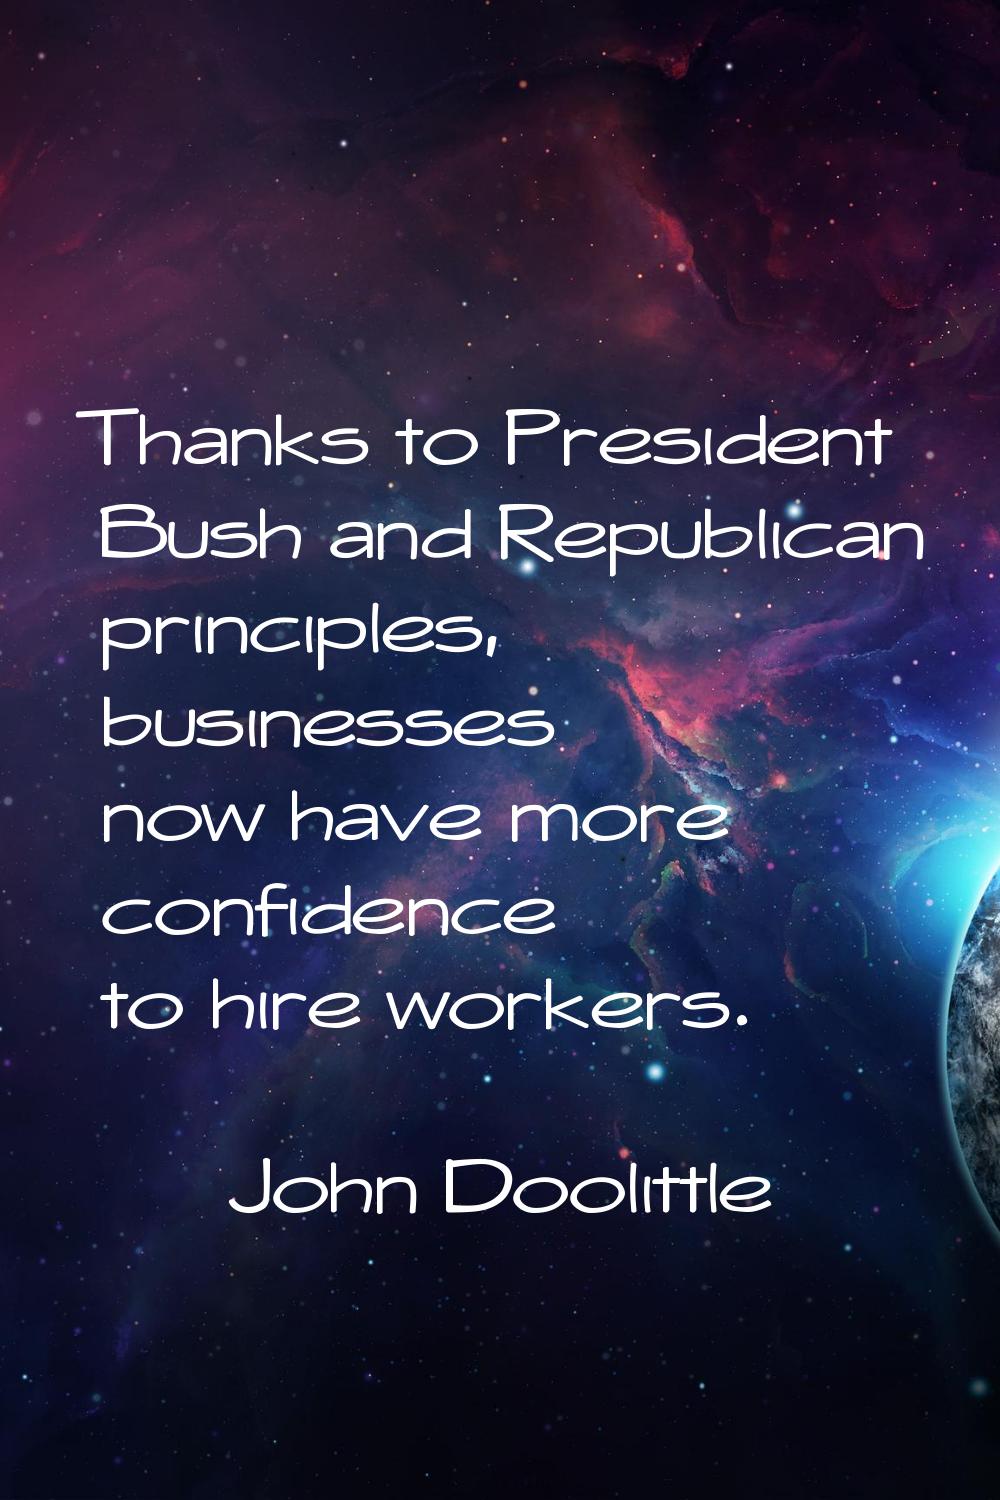 Thanks to President Bush and Republican principles, businesses now have more confidence to hire wor